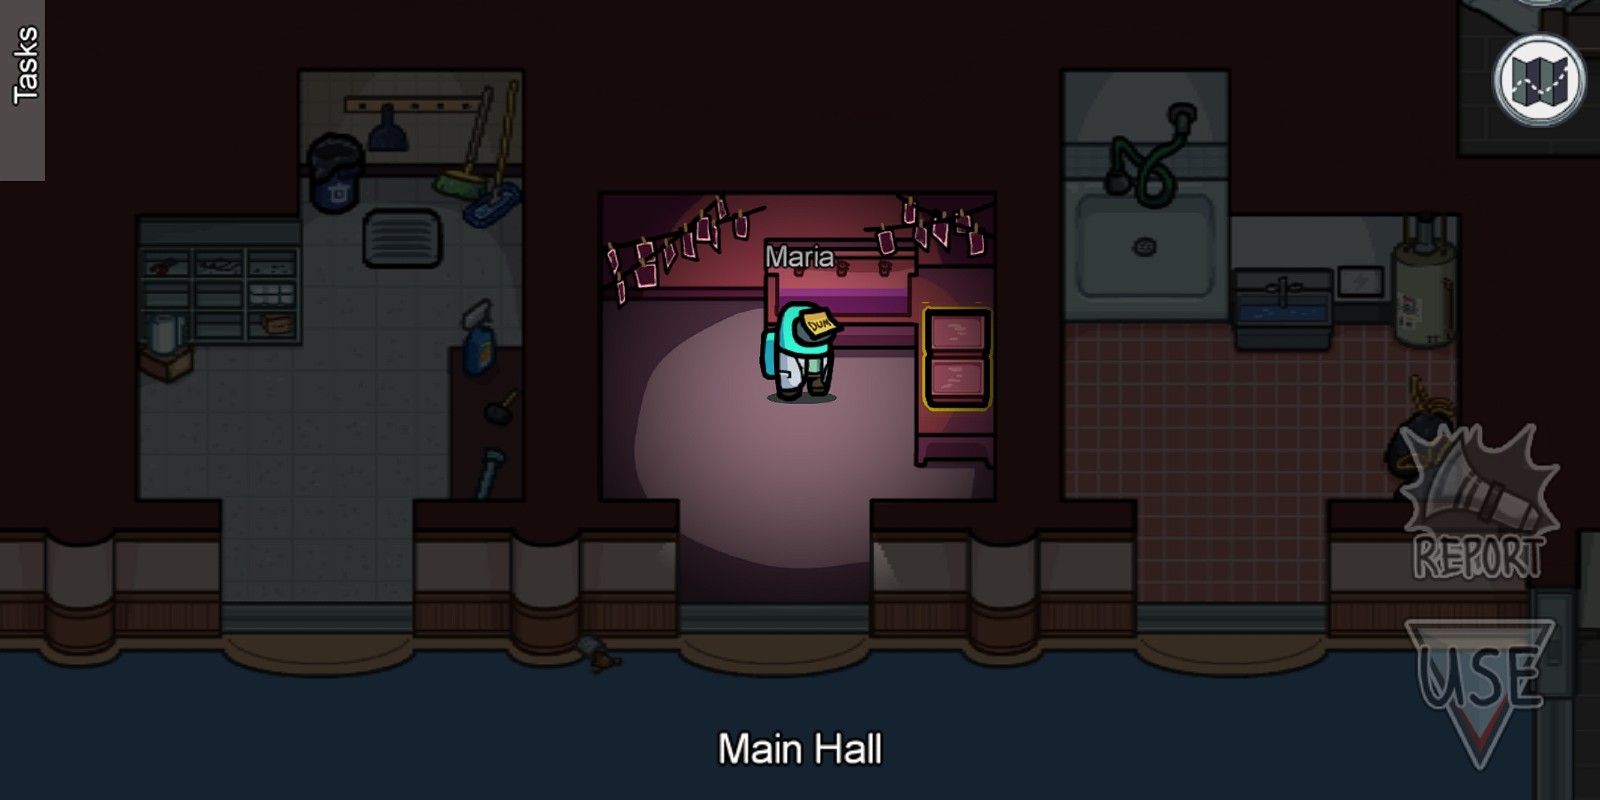 A player enters the dark room in the Main Hall of the Airship in Among Us